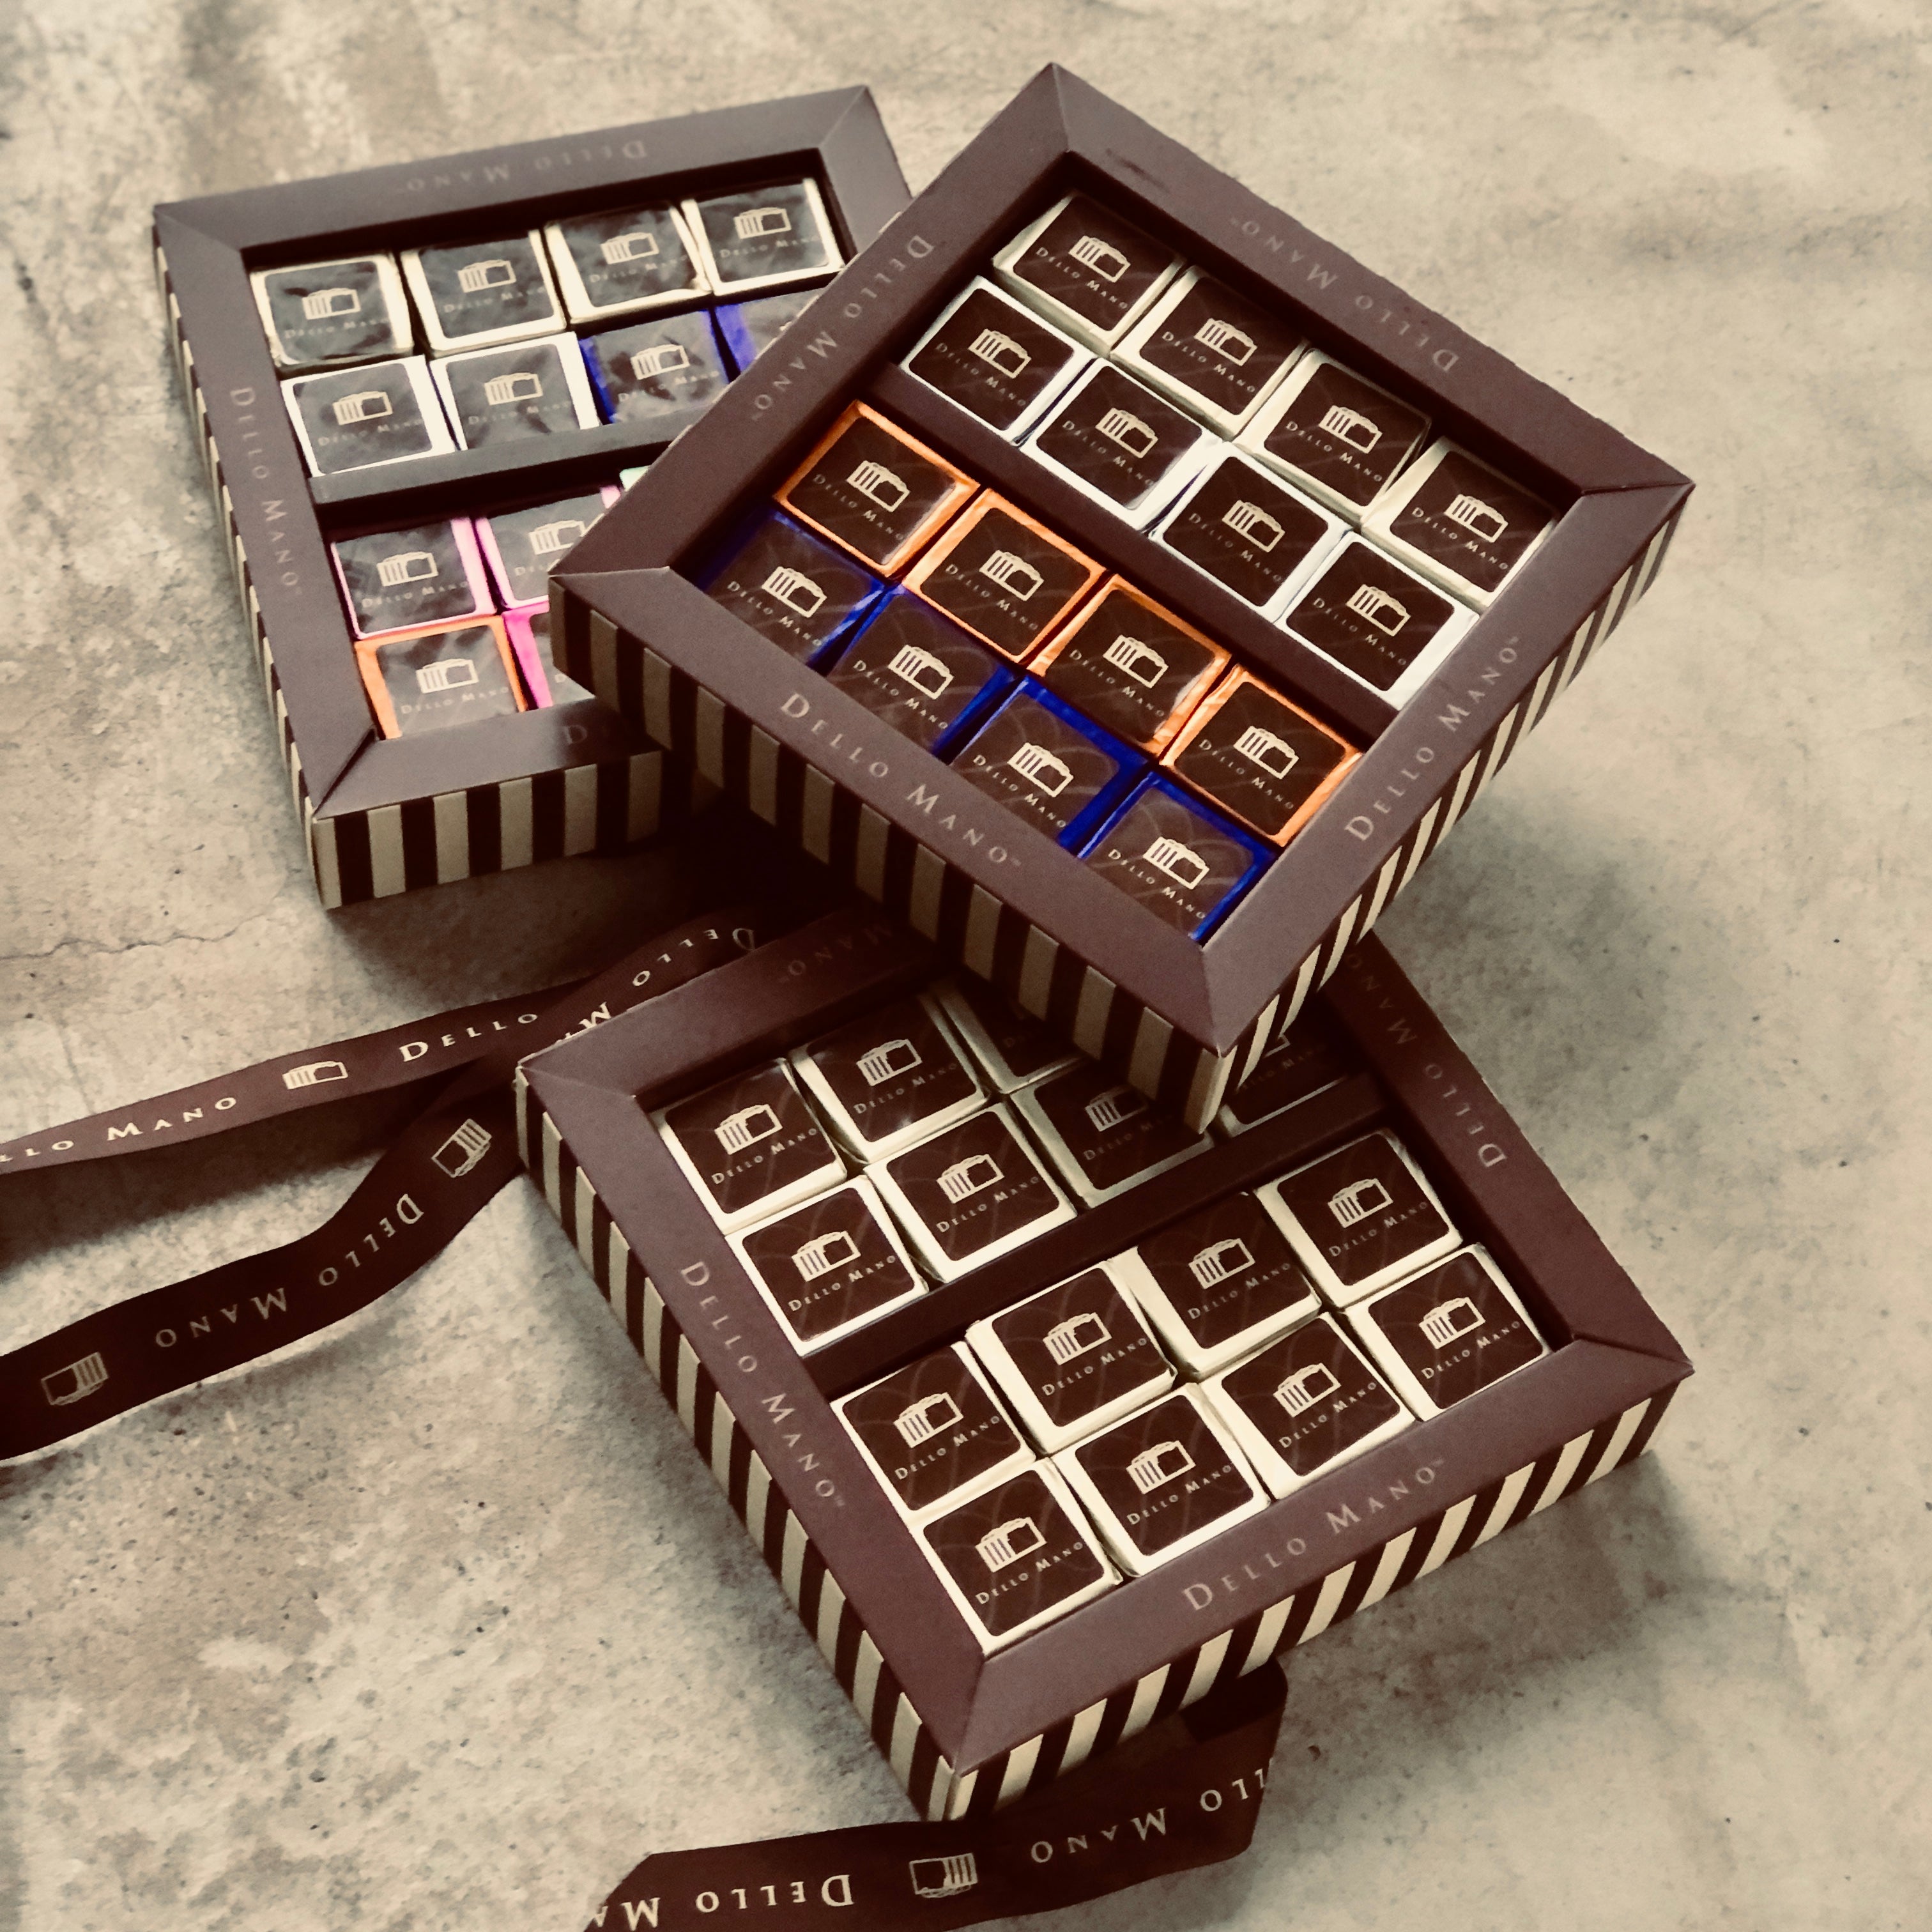 A set of 3 open brownie gift boxes from the Brownie Extravagance Hamper. Each box shows individually foil wrapped brownies each with a logo that says Dello Mano